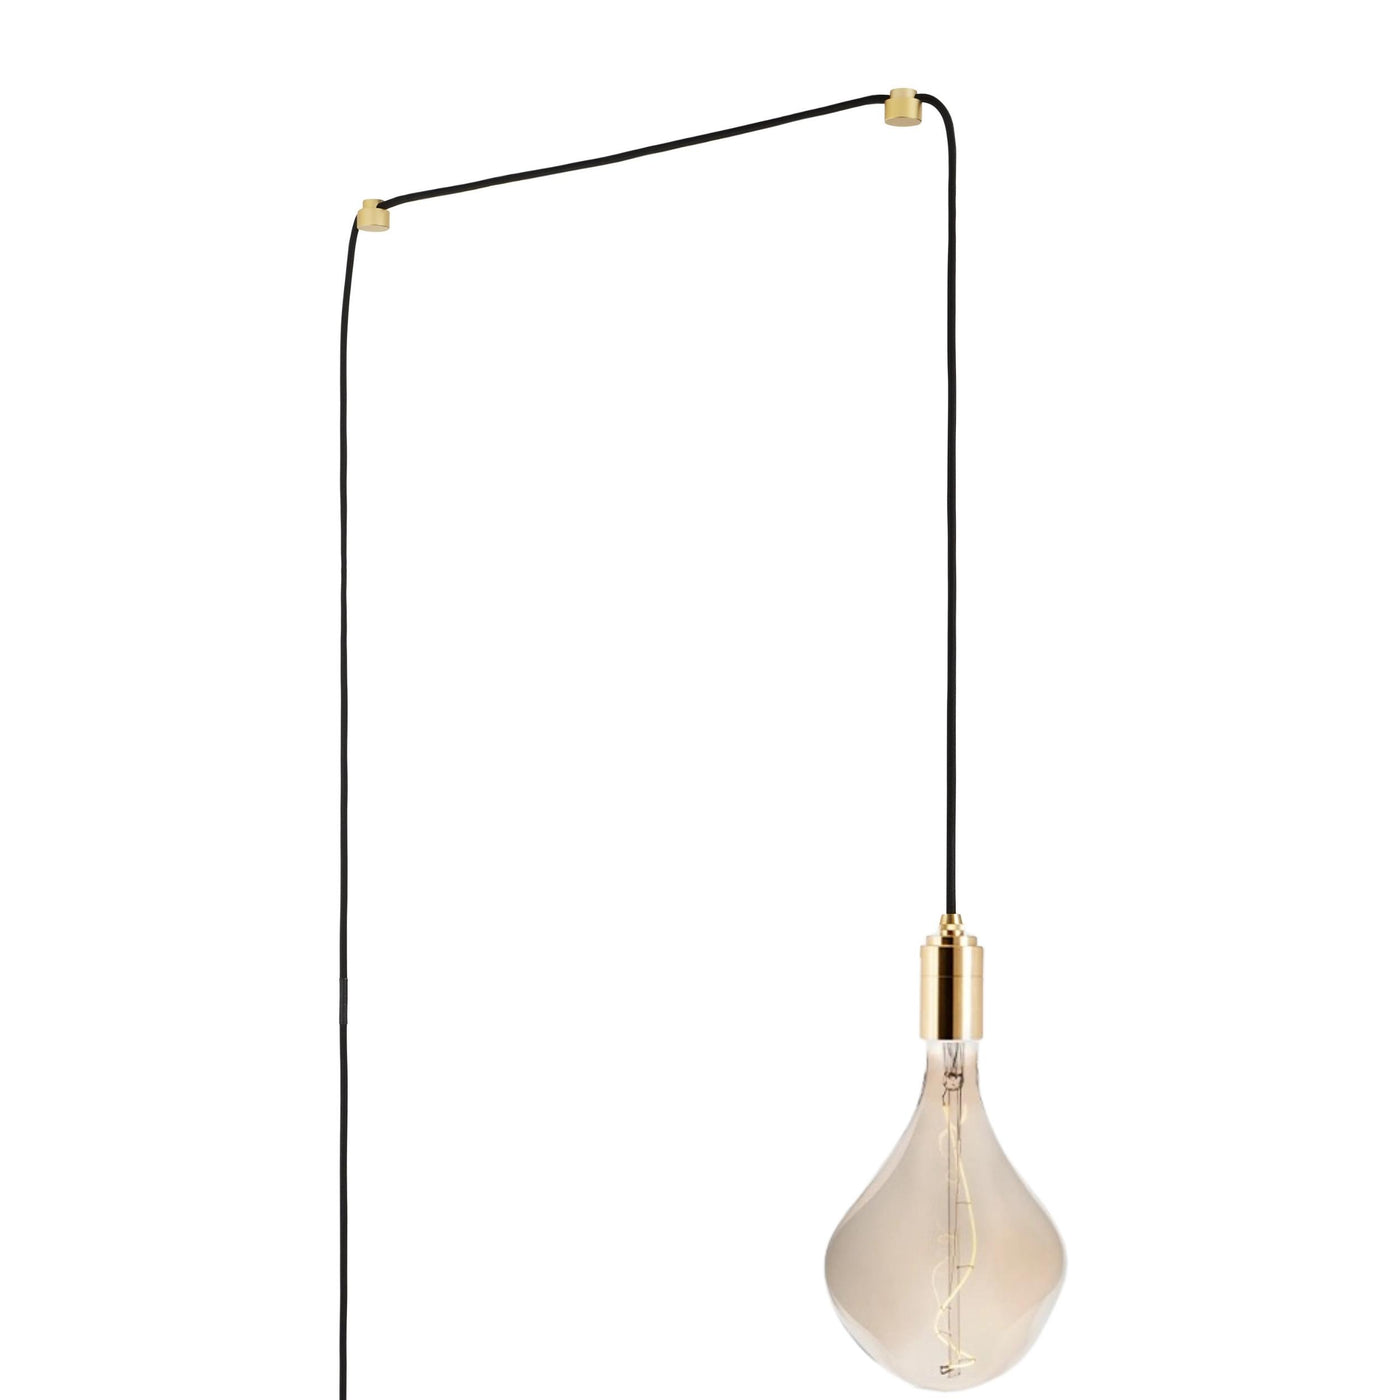 Tala Plug-in pendant in brass with Voronoi ii LED bulb. Free UK delivery at someday designs #colour_brass